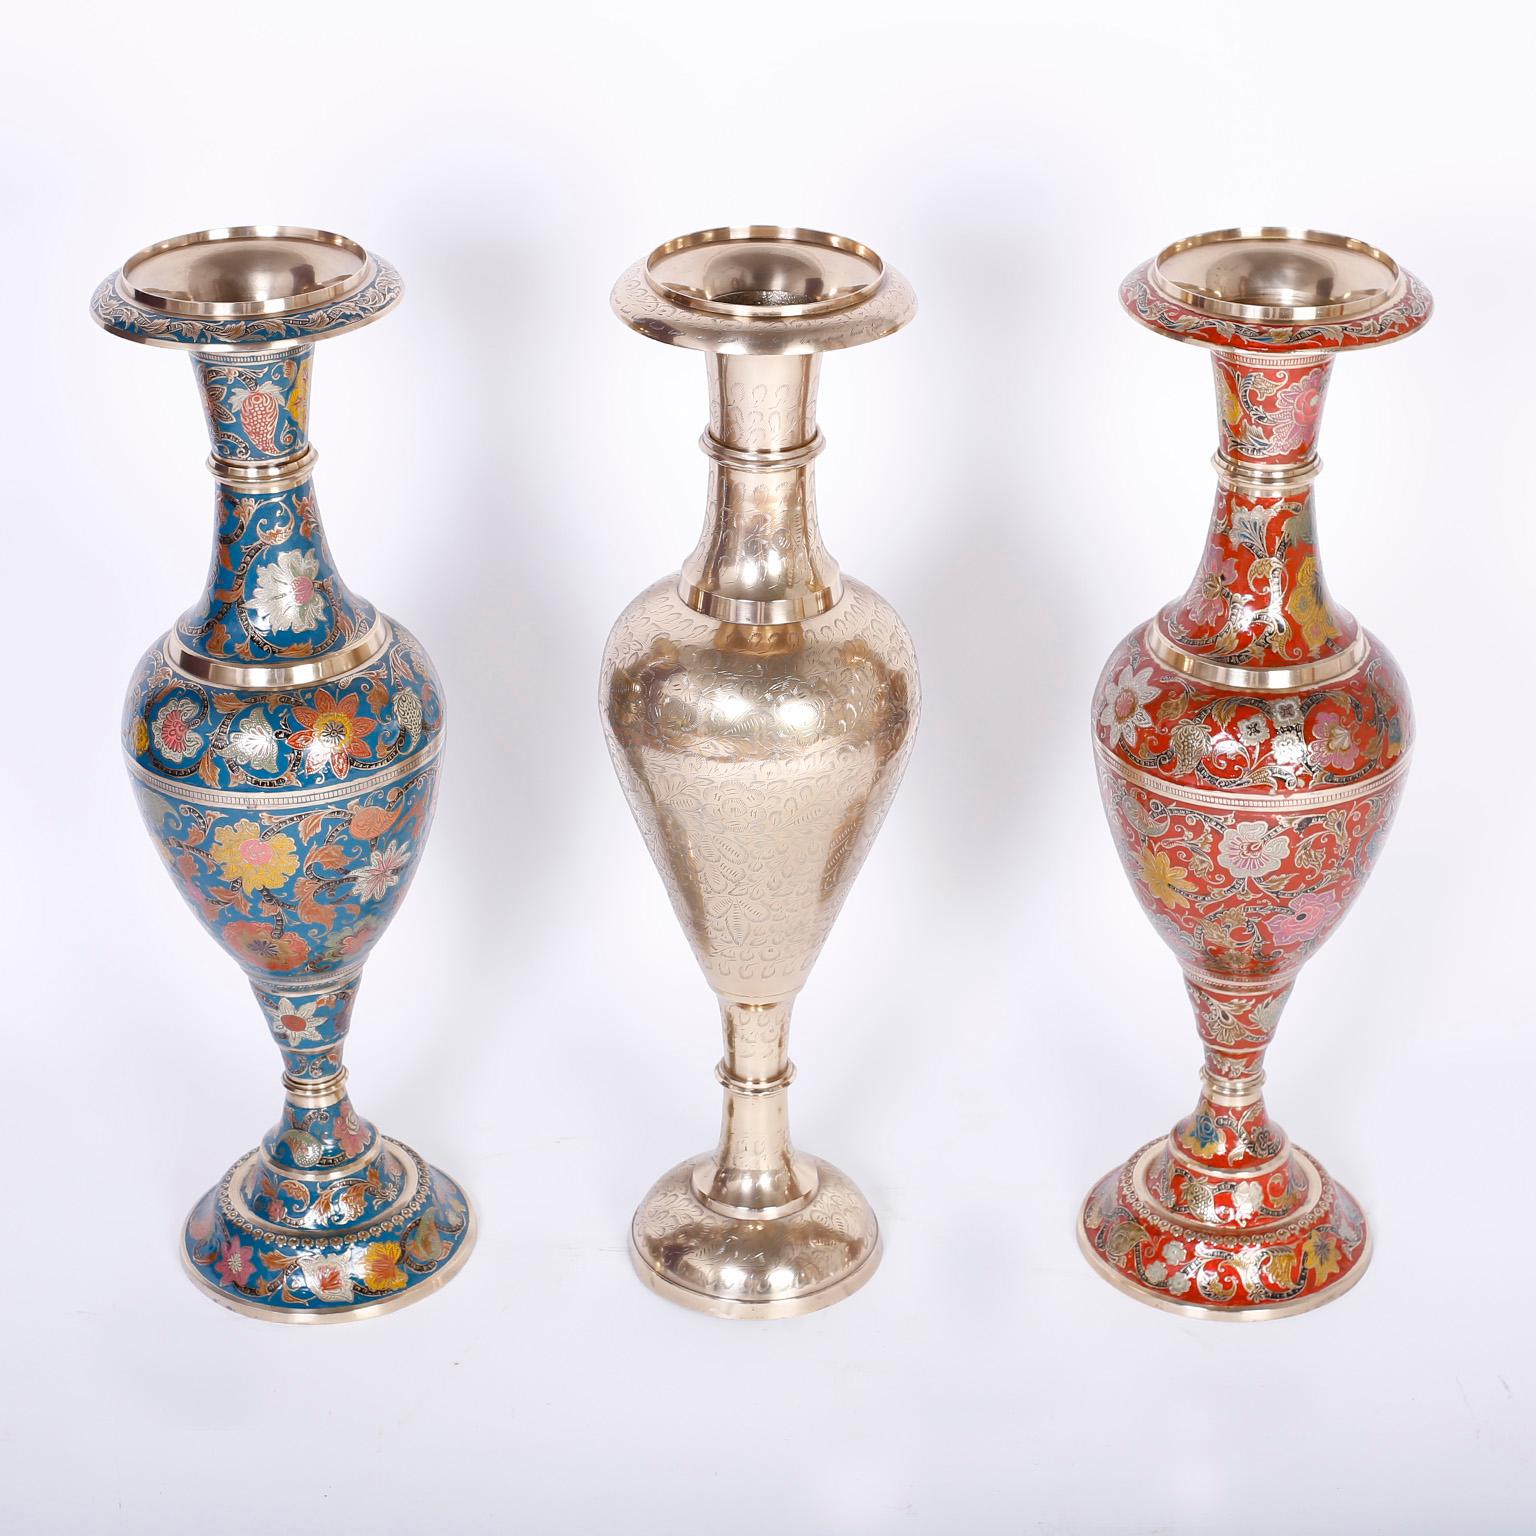 Here are three Anglo-Indian tall dramatic vases or urns crafted in spun brass and hand etched or inscribed. The left and right urns are hand decorated with enamel in lovely floral designs. All three are hand polished and lacquered for easy care.
   